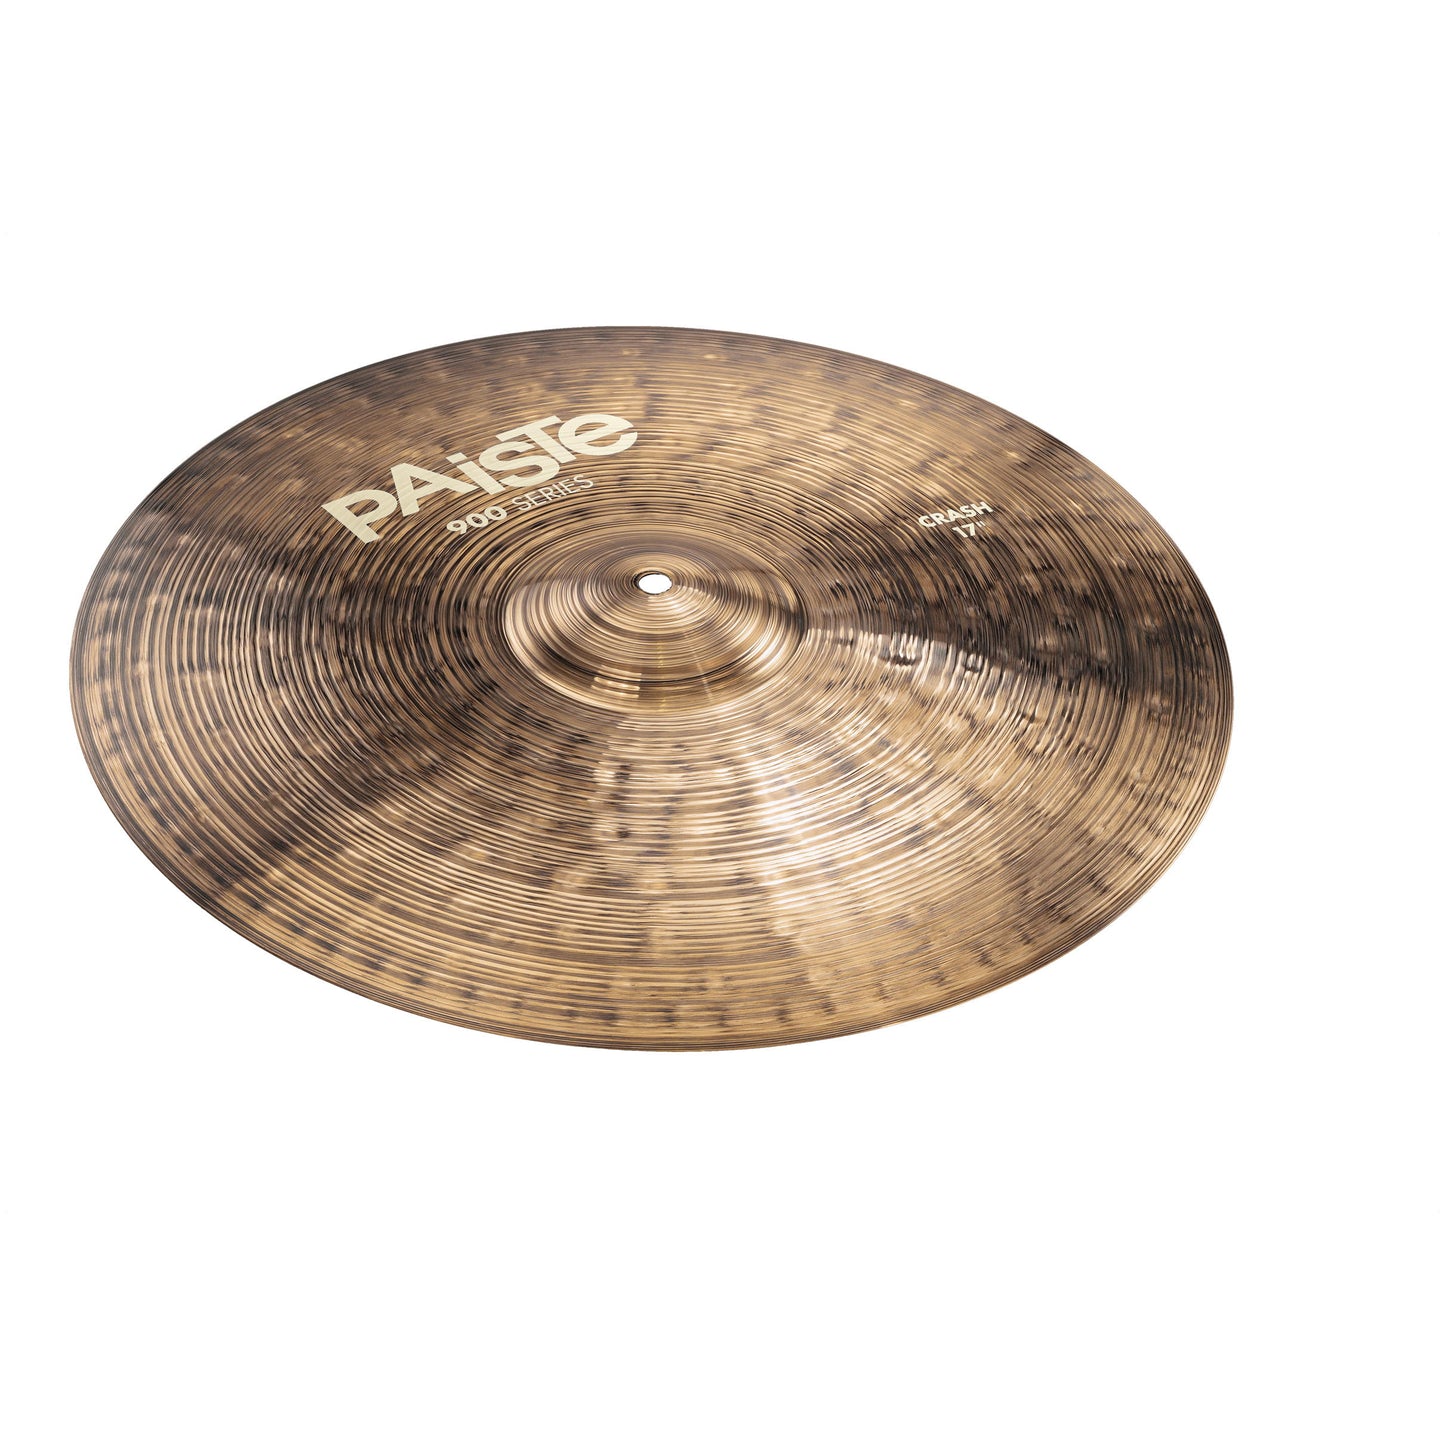 Paiste 900 Series Medium Even Cymbal Pack, 14", 17", 19" and 20"